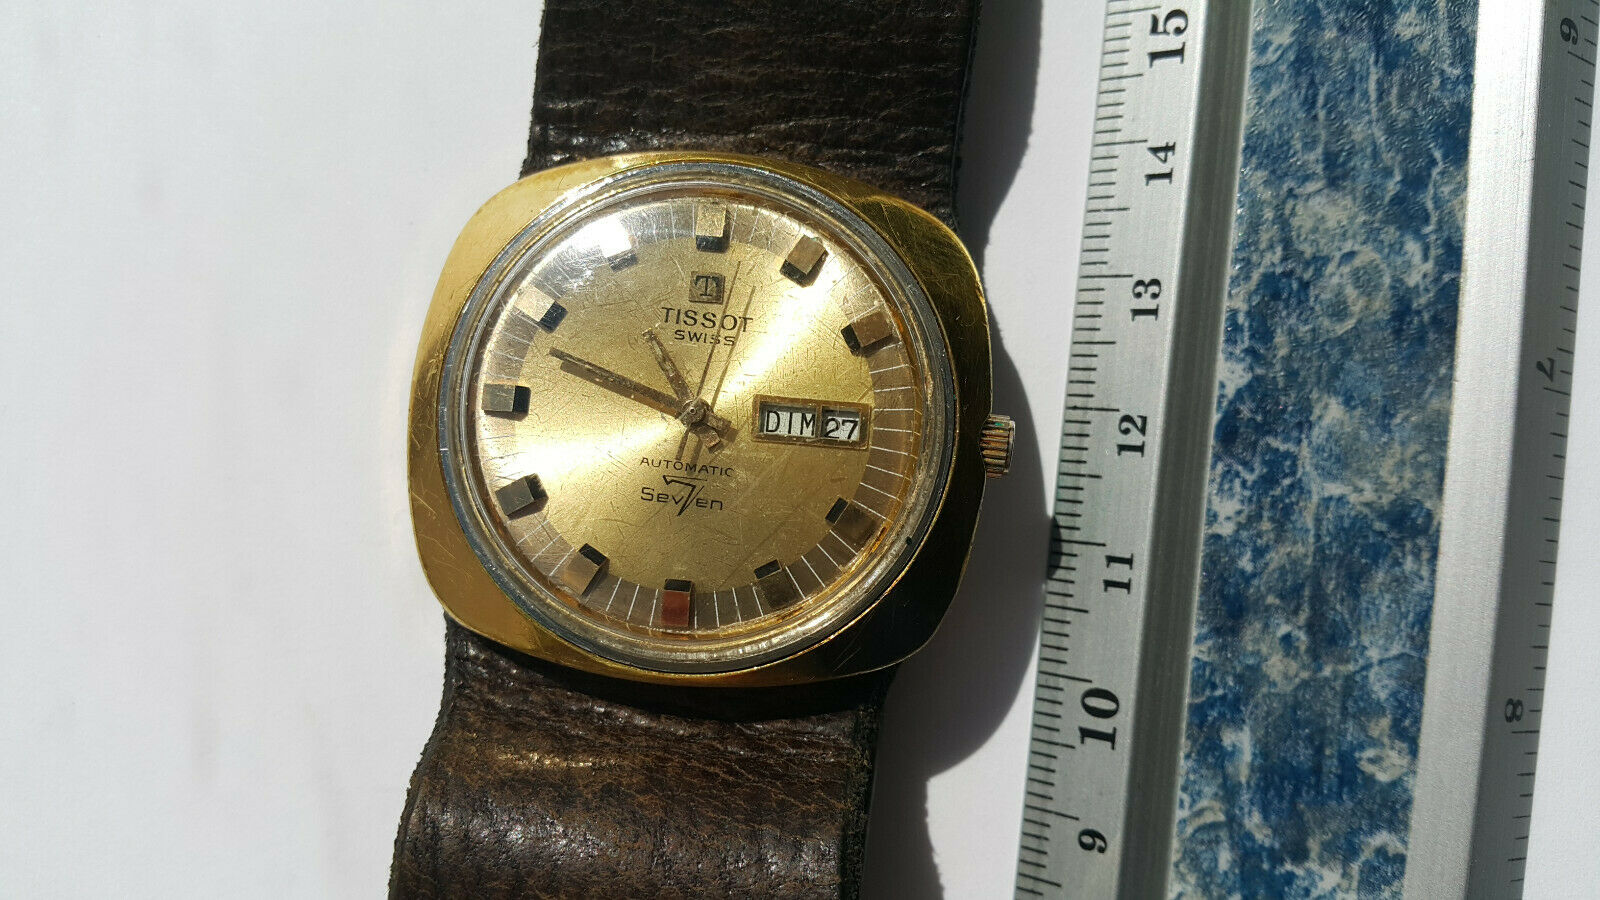 RARE VINTAGE TISSOT SWISS SEVEN AUTOMATIC TOOL 107. GOLD FILLED 